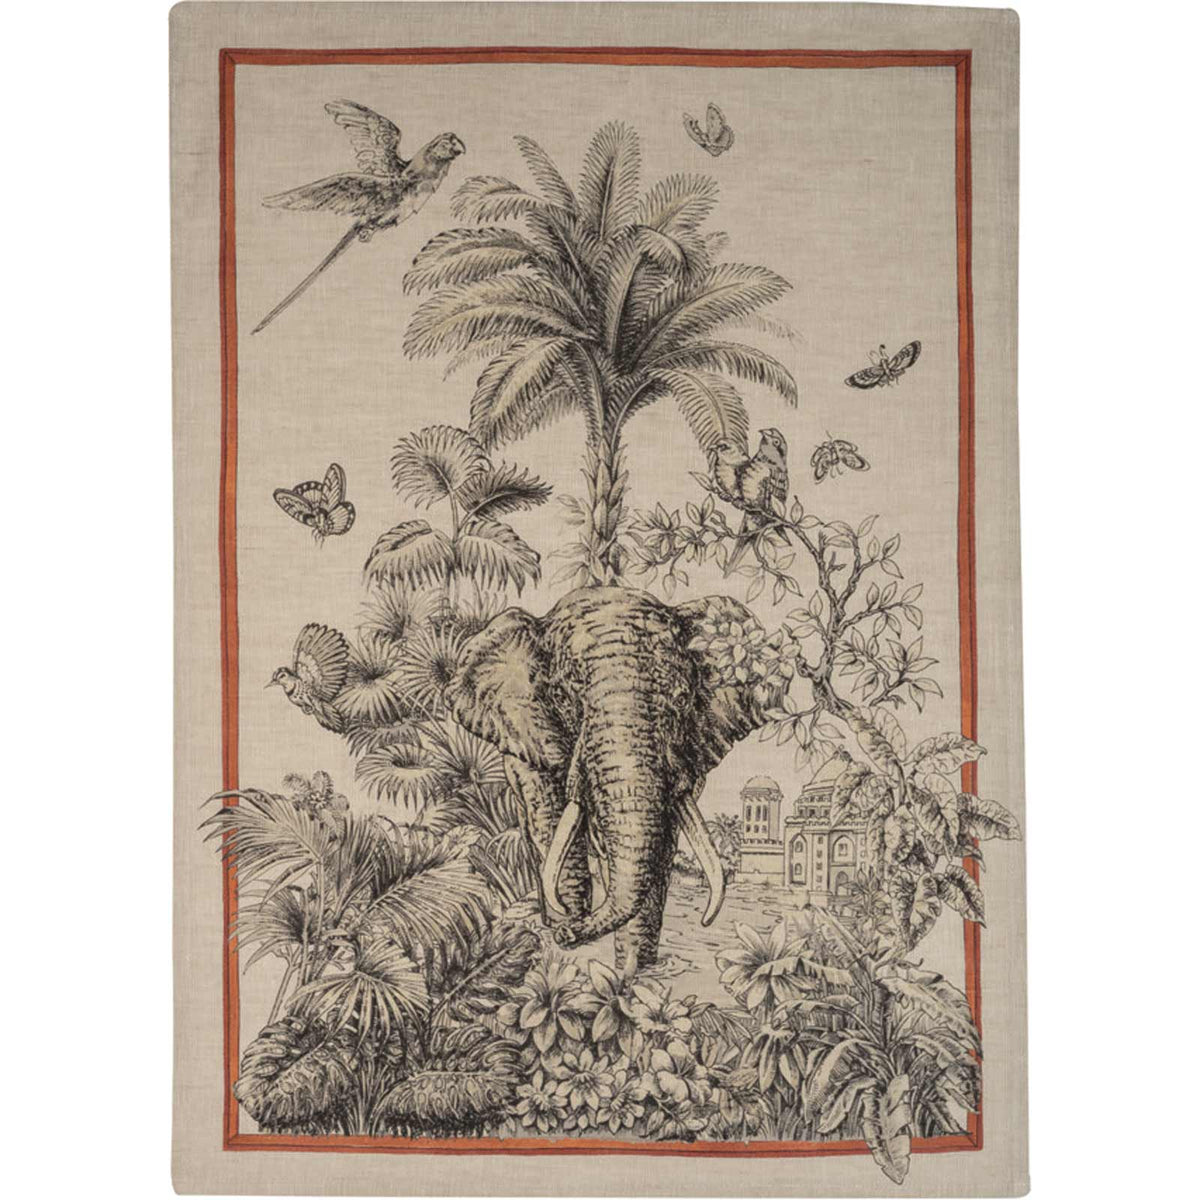 Morocco Kitchen Towel with Elephant and Tropical Foliage in Italian Linen, sold as part of a set of 2 from Caskata